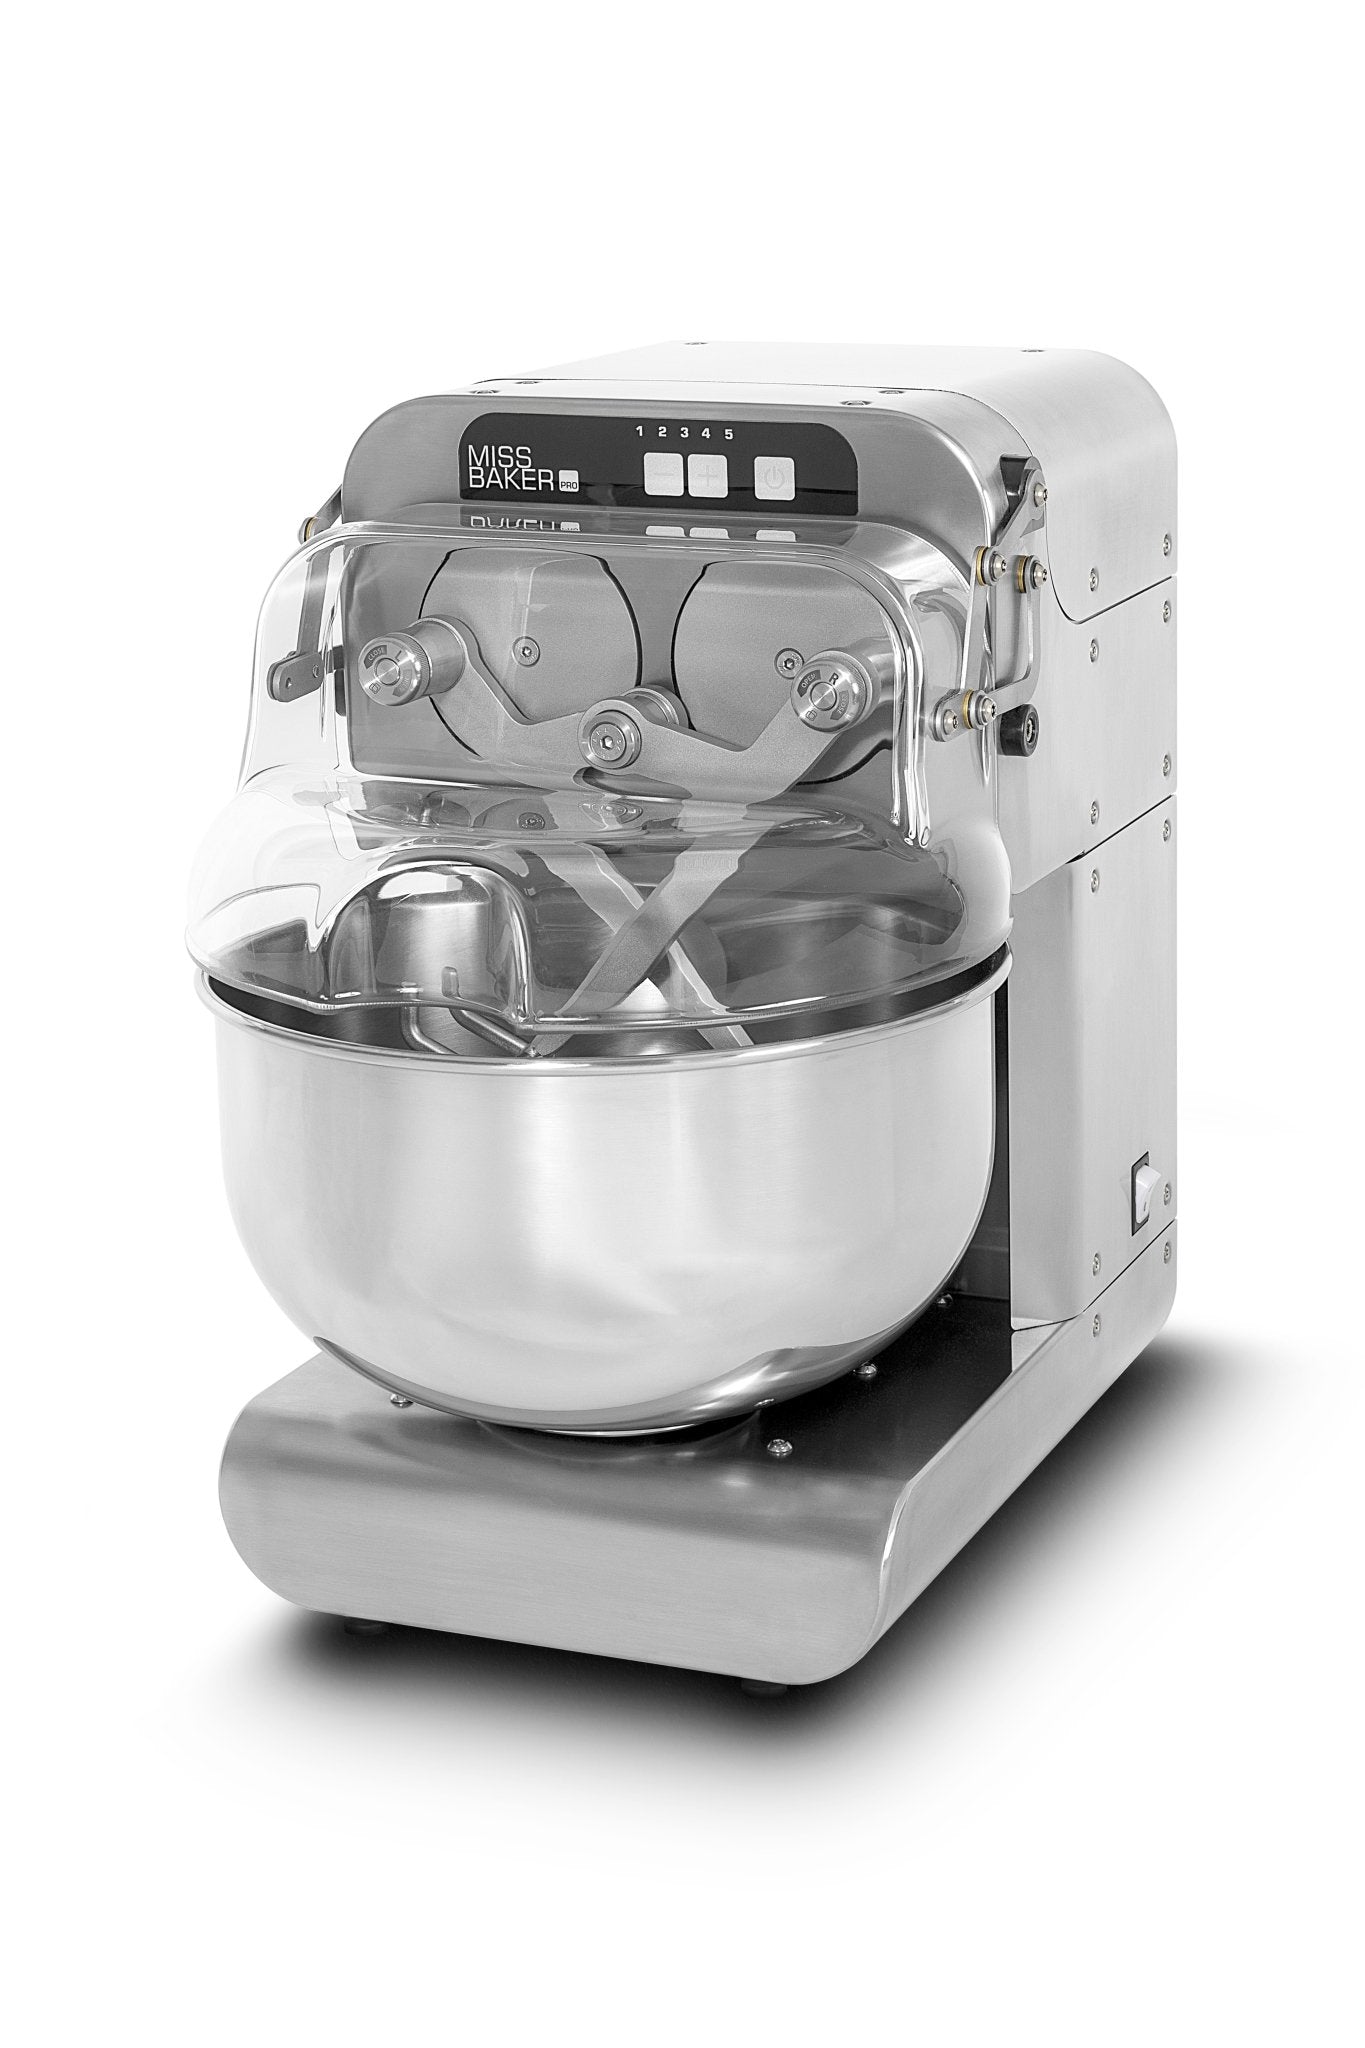 Miss Baker Pro - 3kg/10 Litre Double Arm Mixer, 5 speed, Stainless steel (INOX)